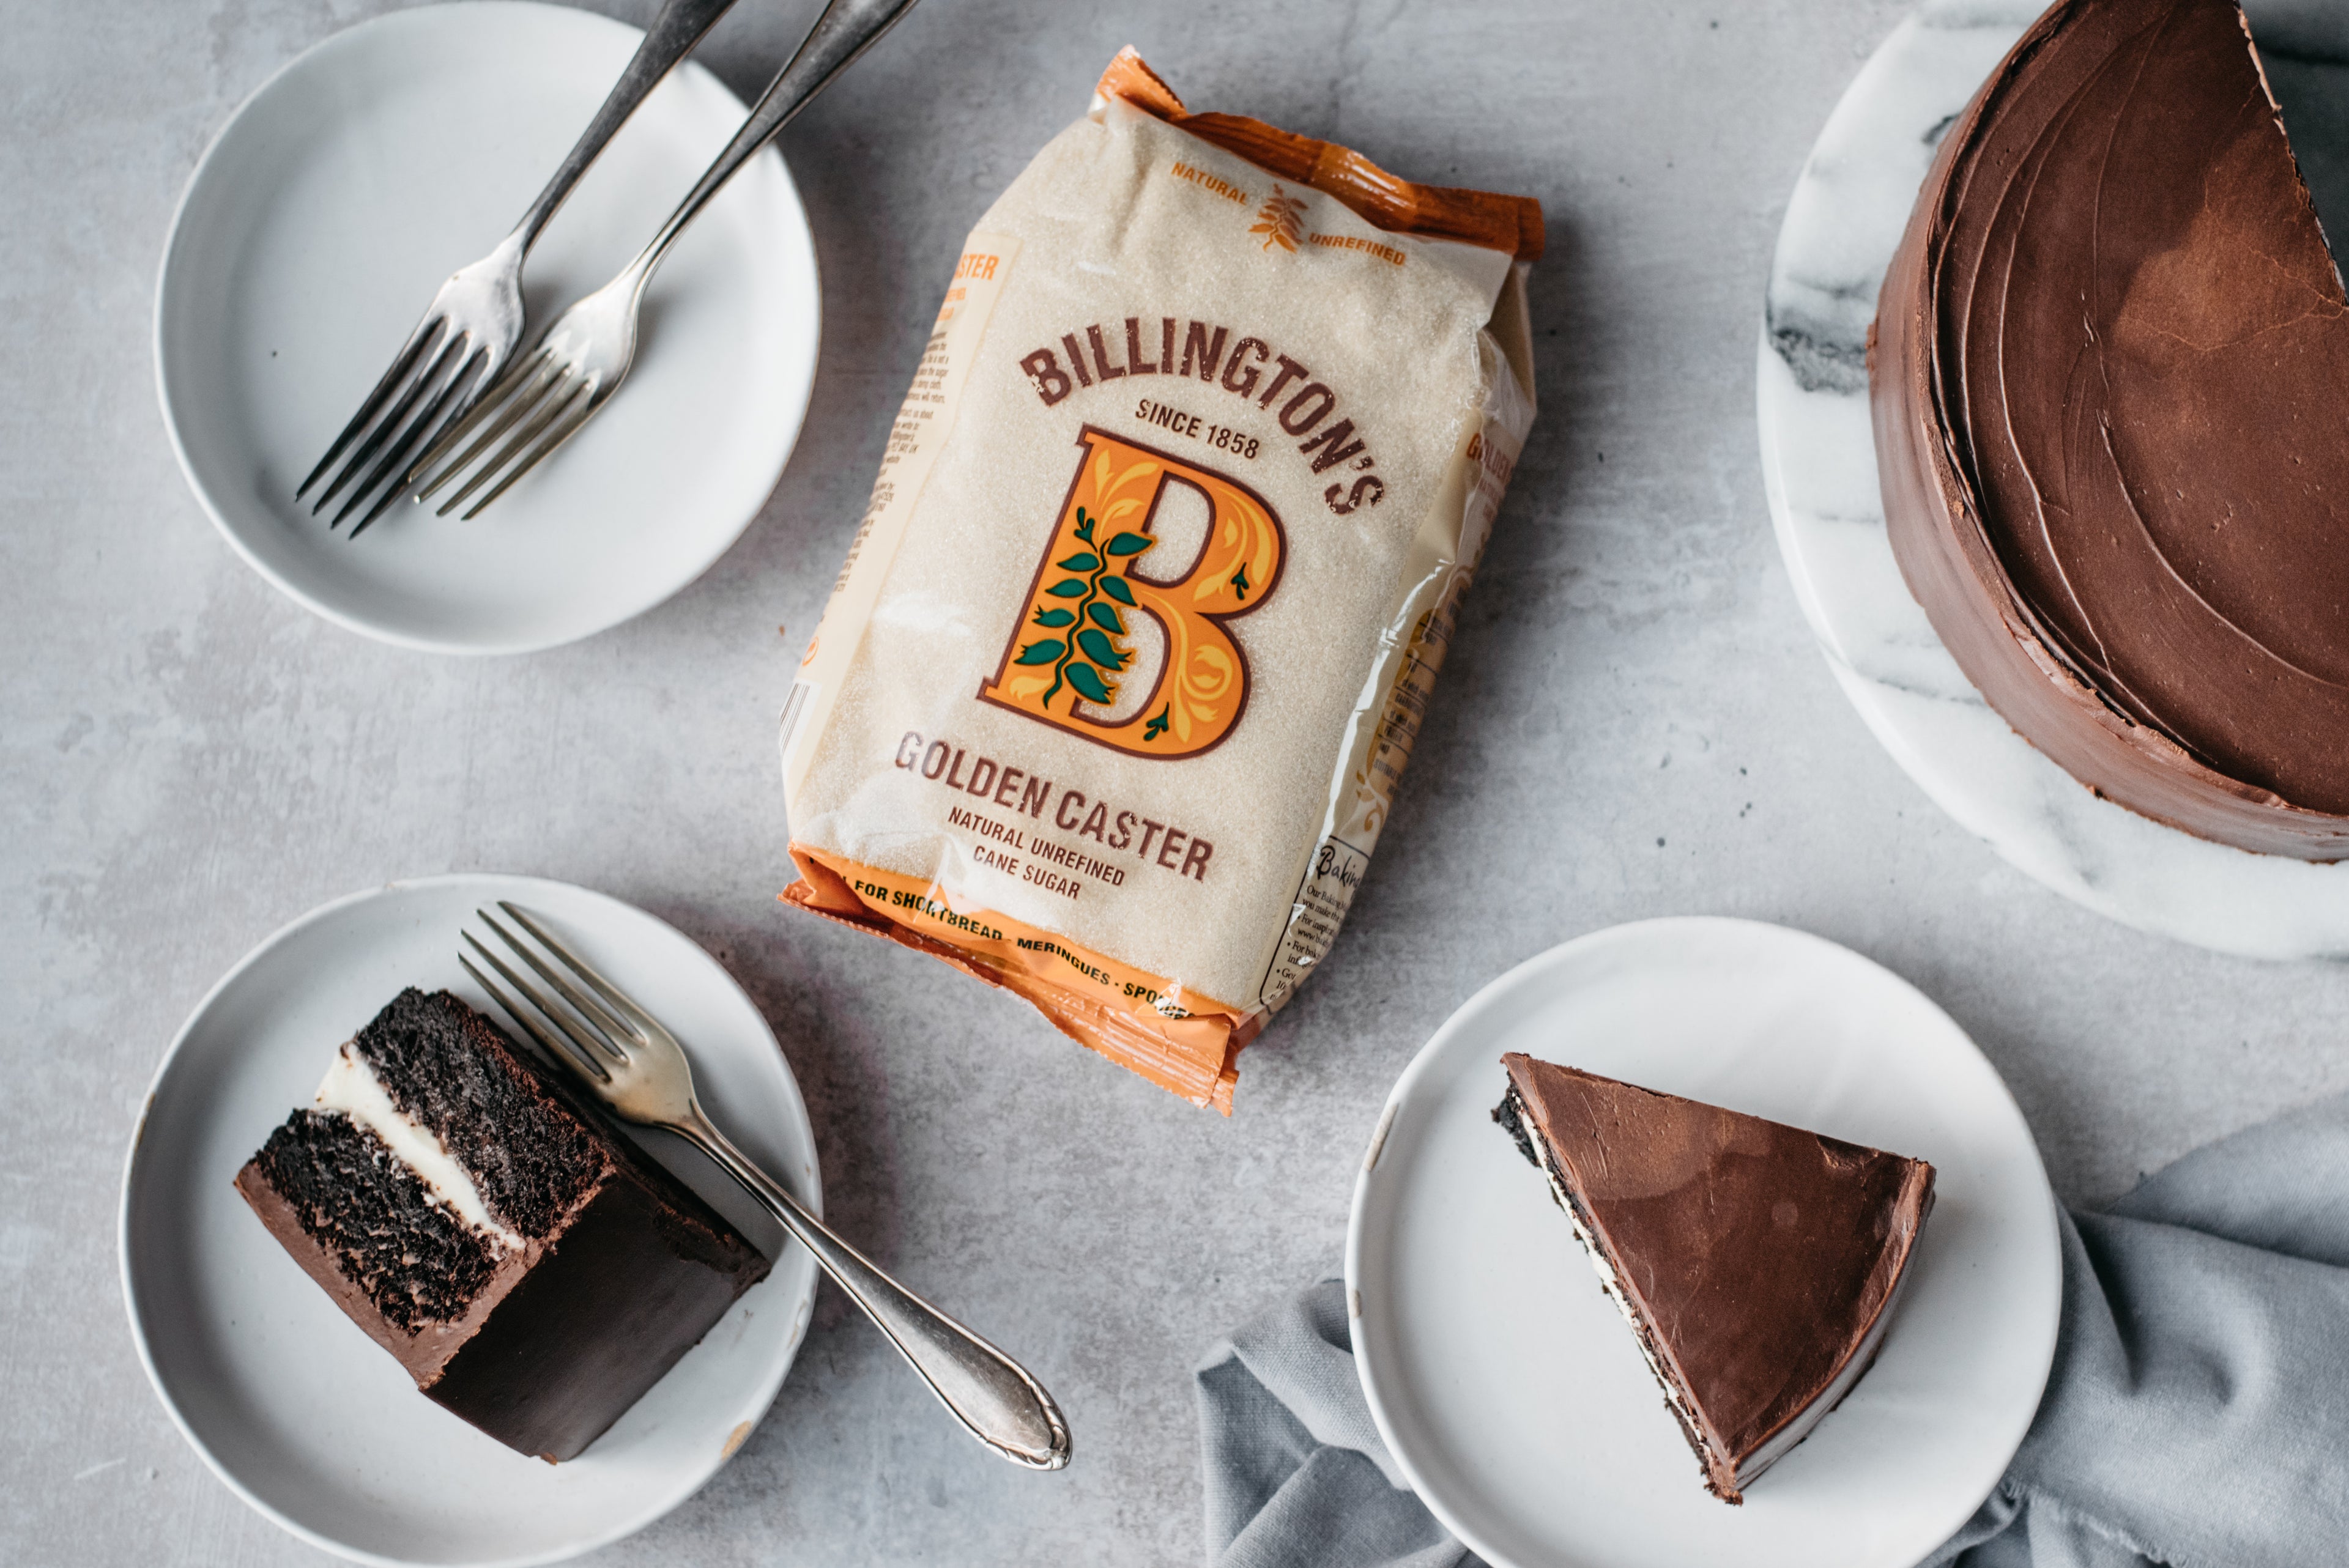 Top view of slices of Best Chocolate Cake served on plates, next to a flat lay bag of Billington's Golden Caster Sugar